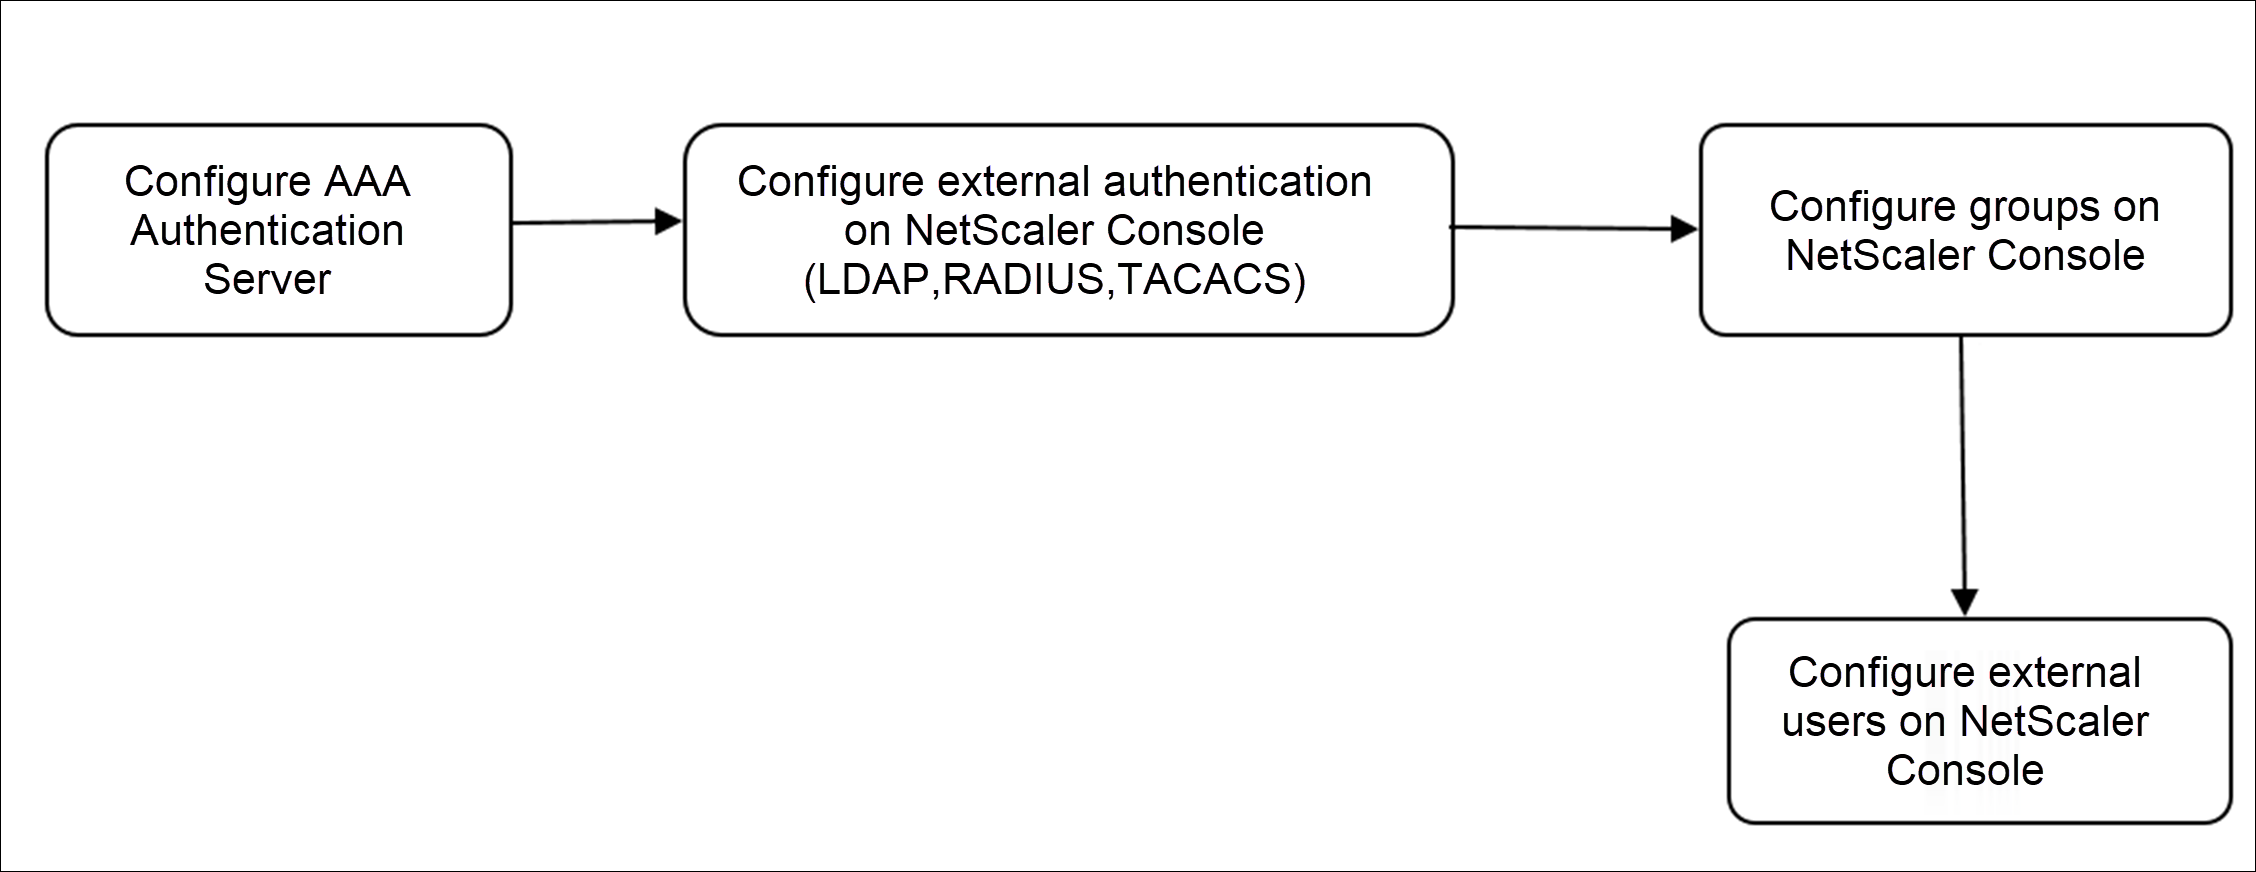 Authentication external users